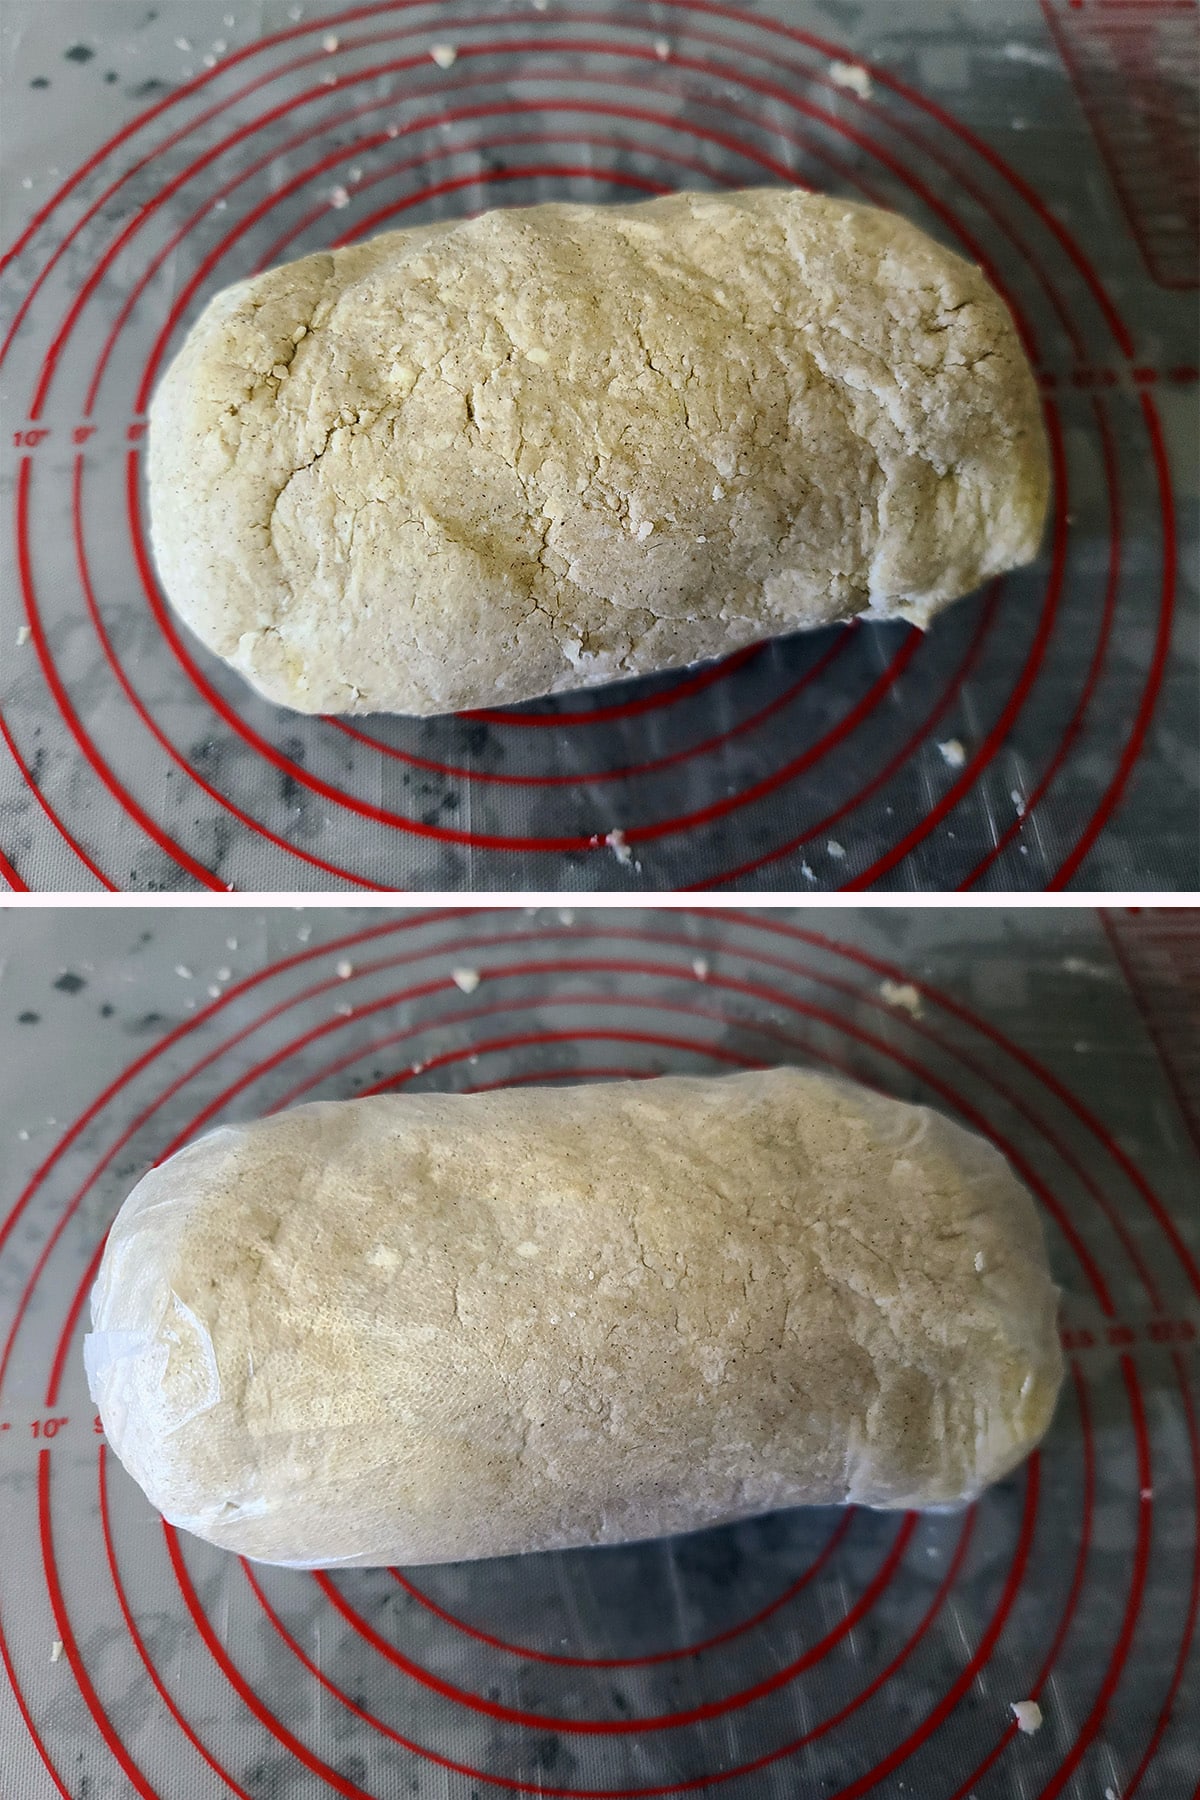 A lump of gluten-free dough, before and after being wrapped in plastic wrap.